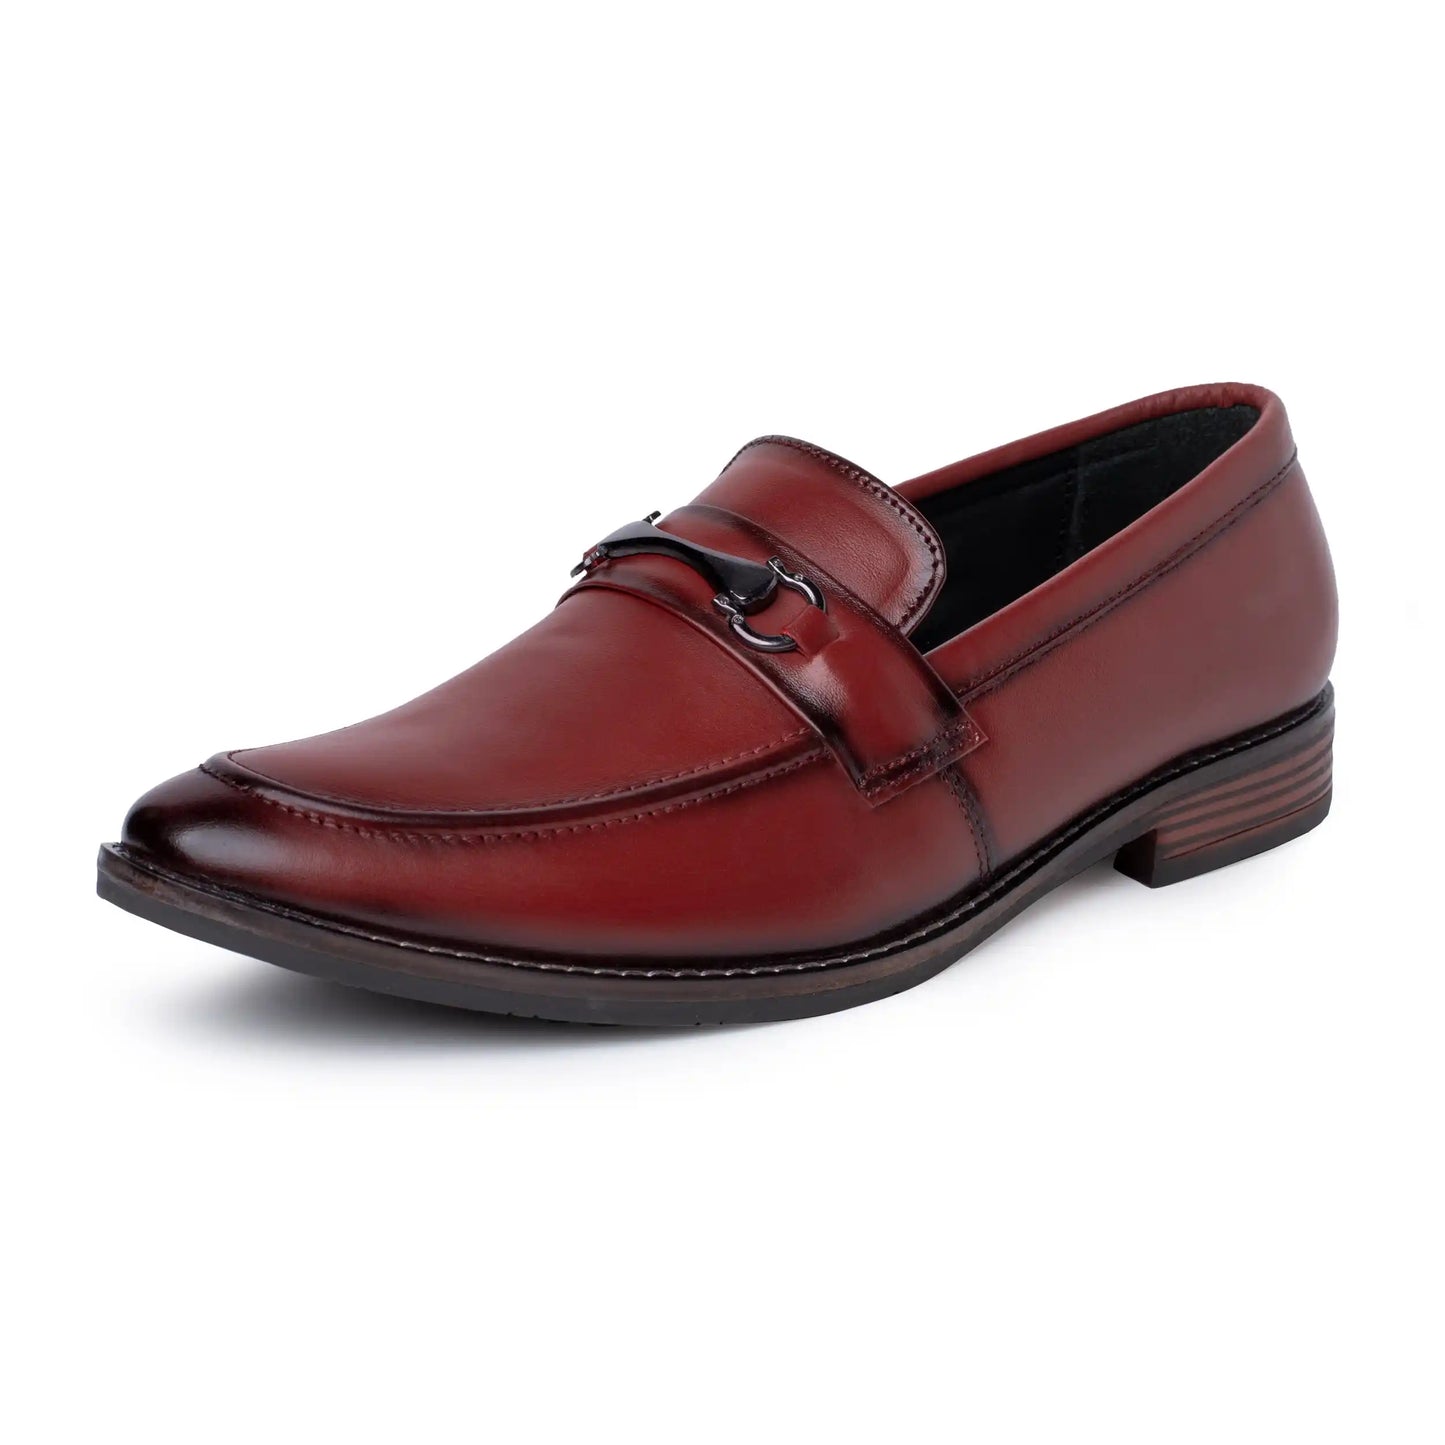 Bit Loafers for Men Pure Leather Slip On Shoes